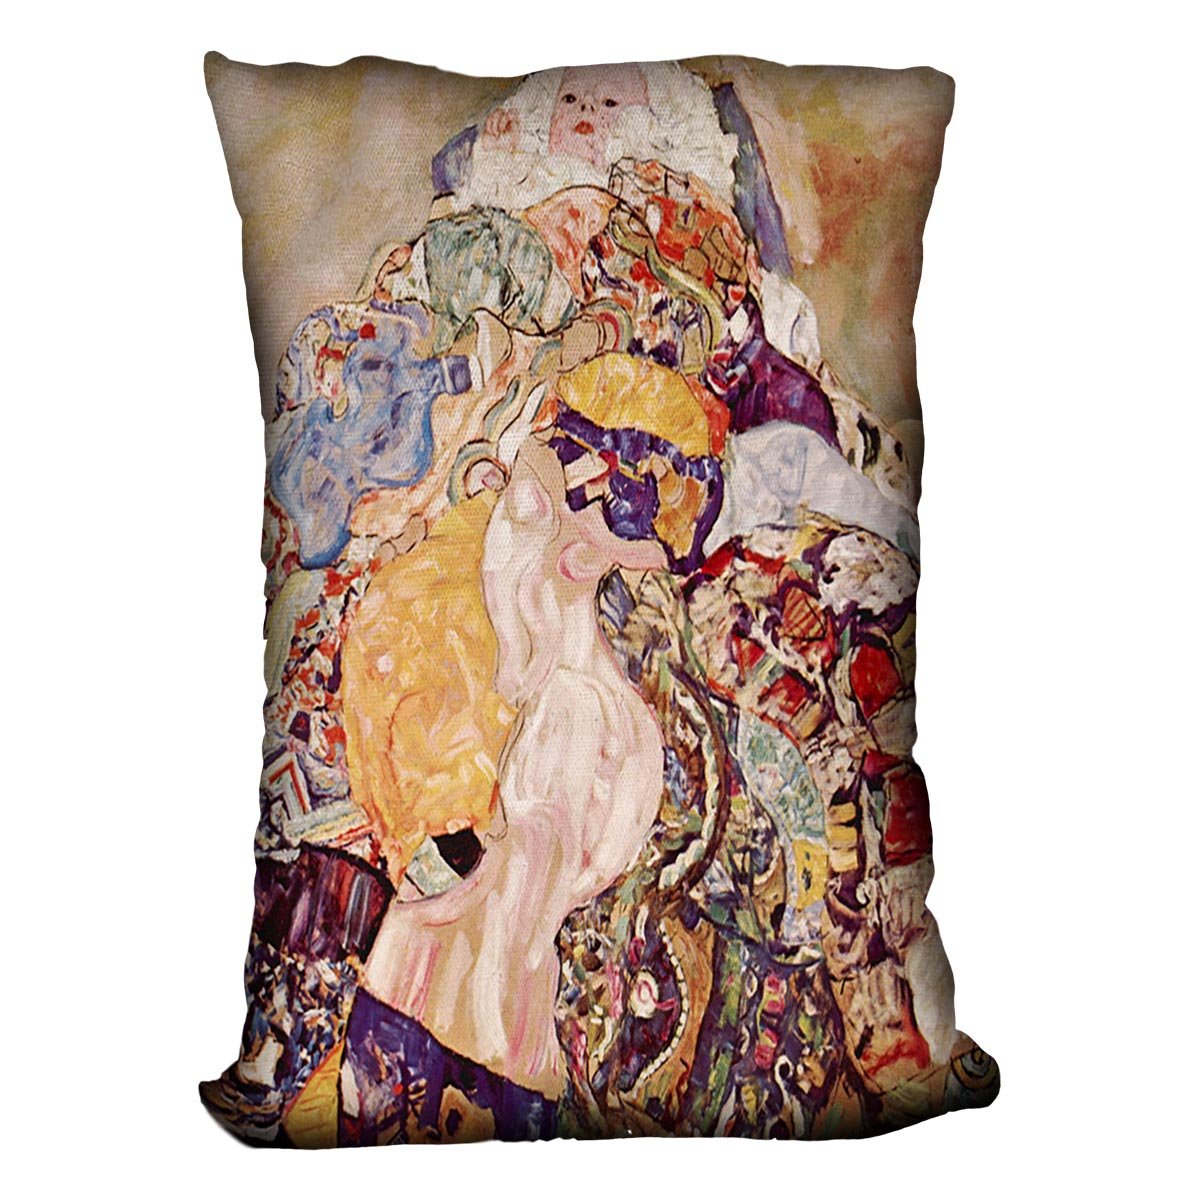 Baby by Klimt Throw Pillow